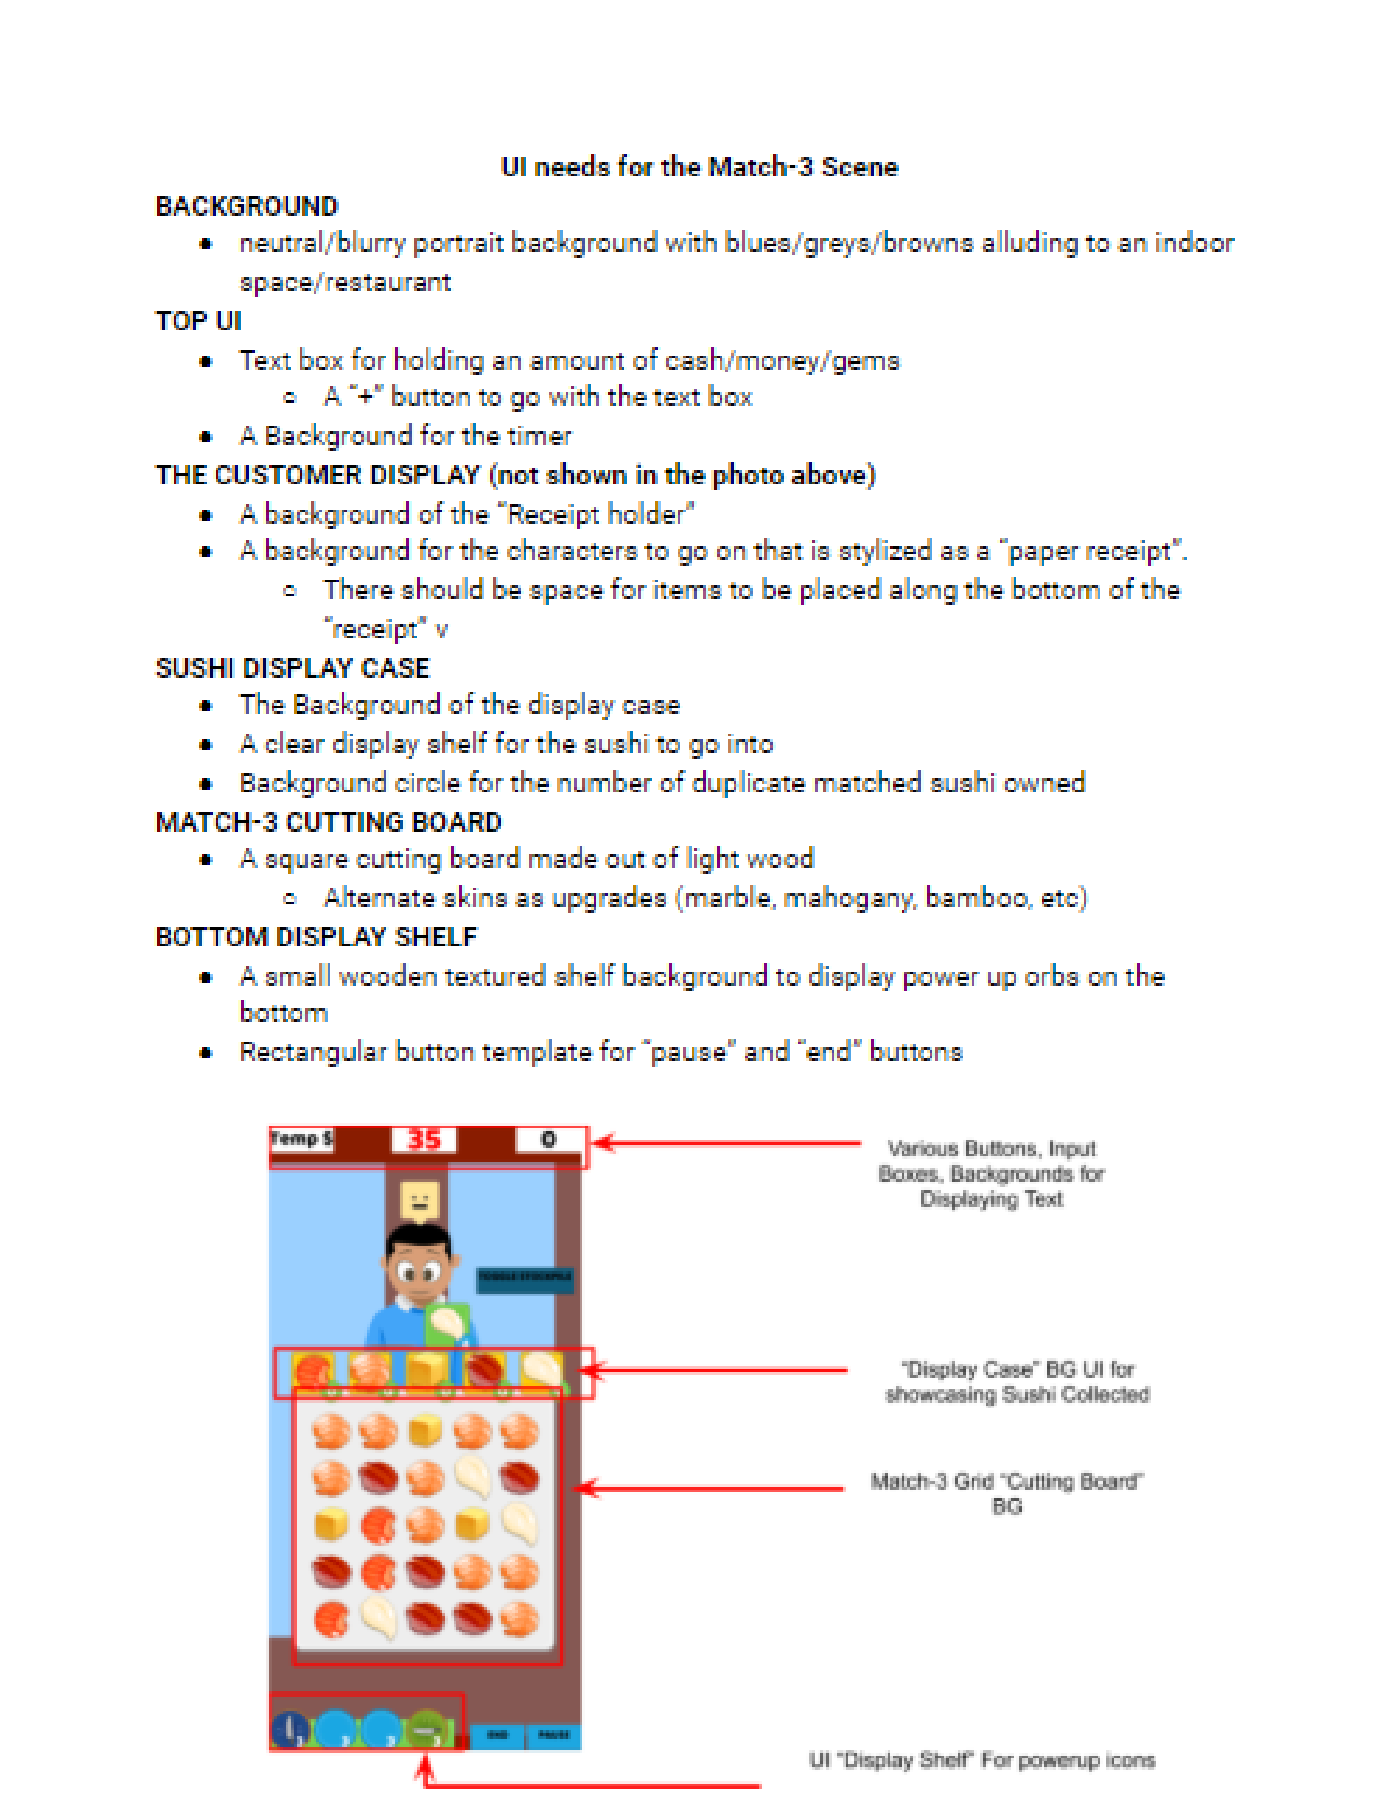 PDF of a game design document for a sushi-themed mobile match-3 game, a gameplay mockum image is displayed next to text detailing the structure of the game's mechanics and graphics, image leads to a full GDD PDF 